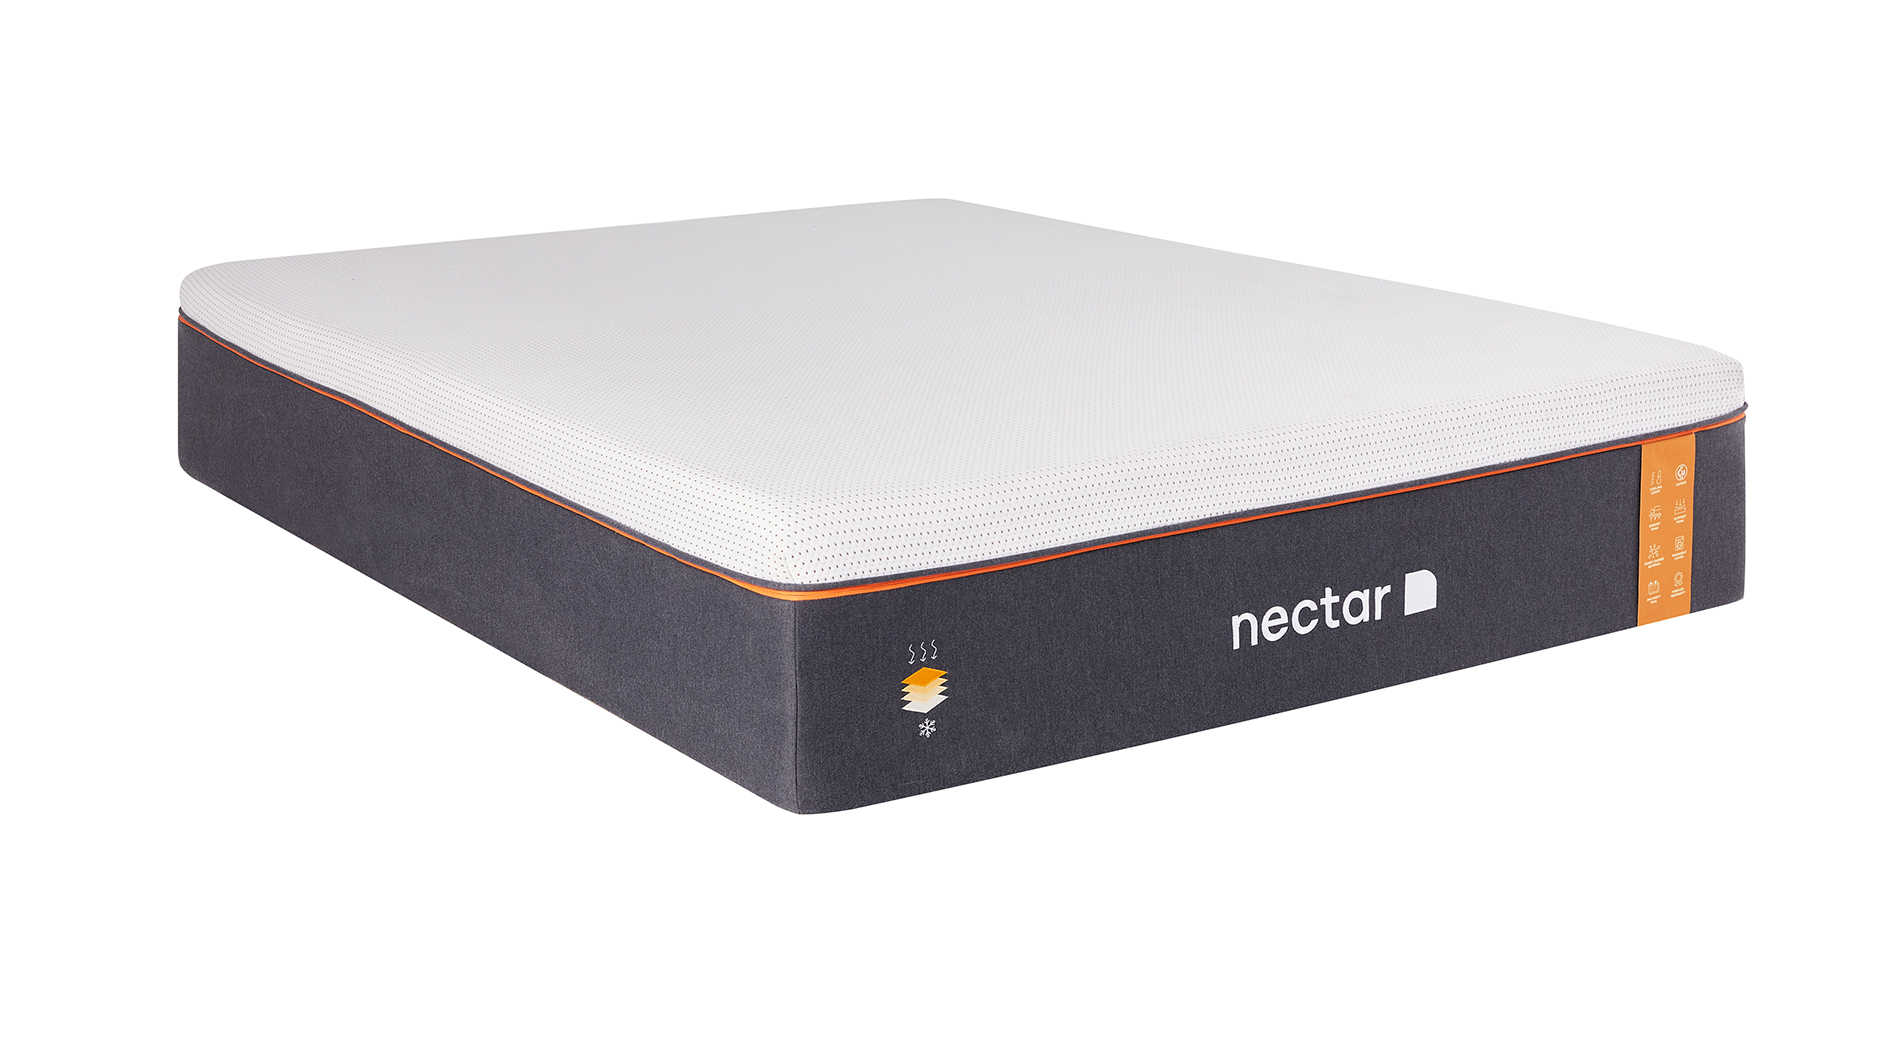 Nectar mattress sales, deals and discount codes: Image shows the Nectar Premier Copper Mattress with white brand logo on the bottom